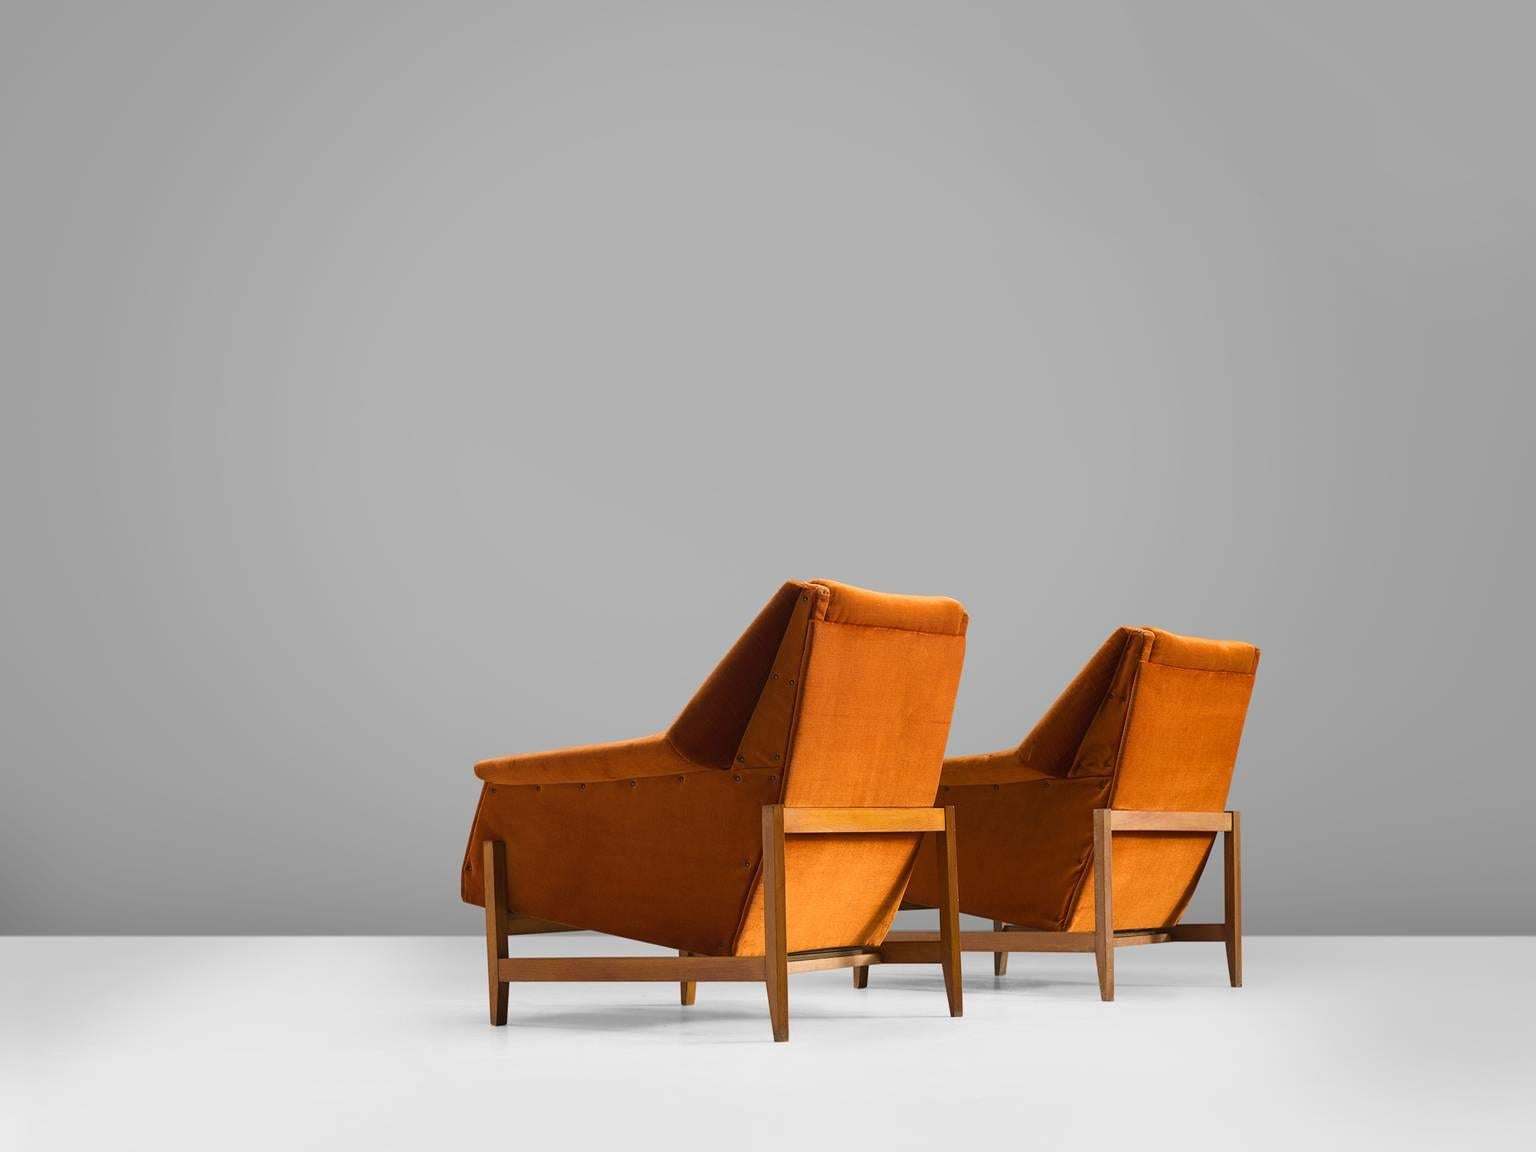 Set of armchairs, orange velours, wood, Italy, 1950s.

This set of lounge chairs is both comfortable and sculptural. The lines in this set are geometric and sharp with an angular frame that support the velvet, reclining shell. The chairs are wide